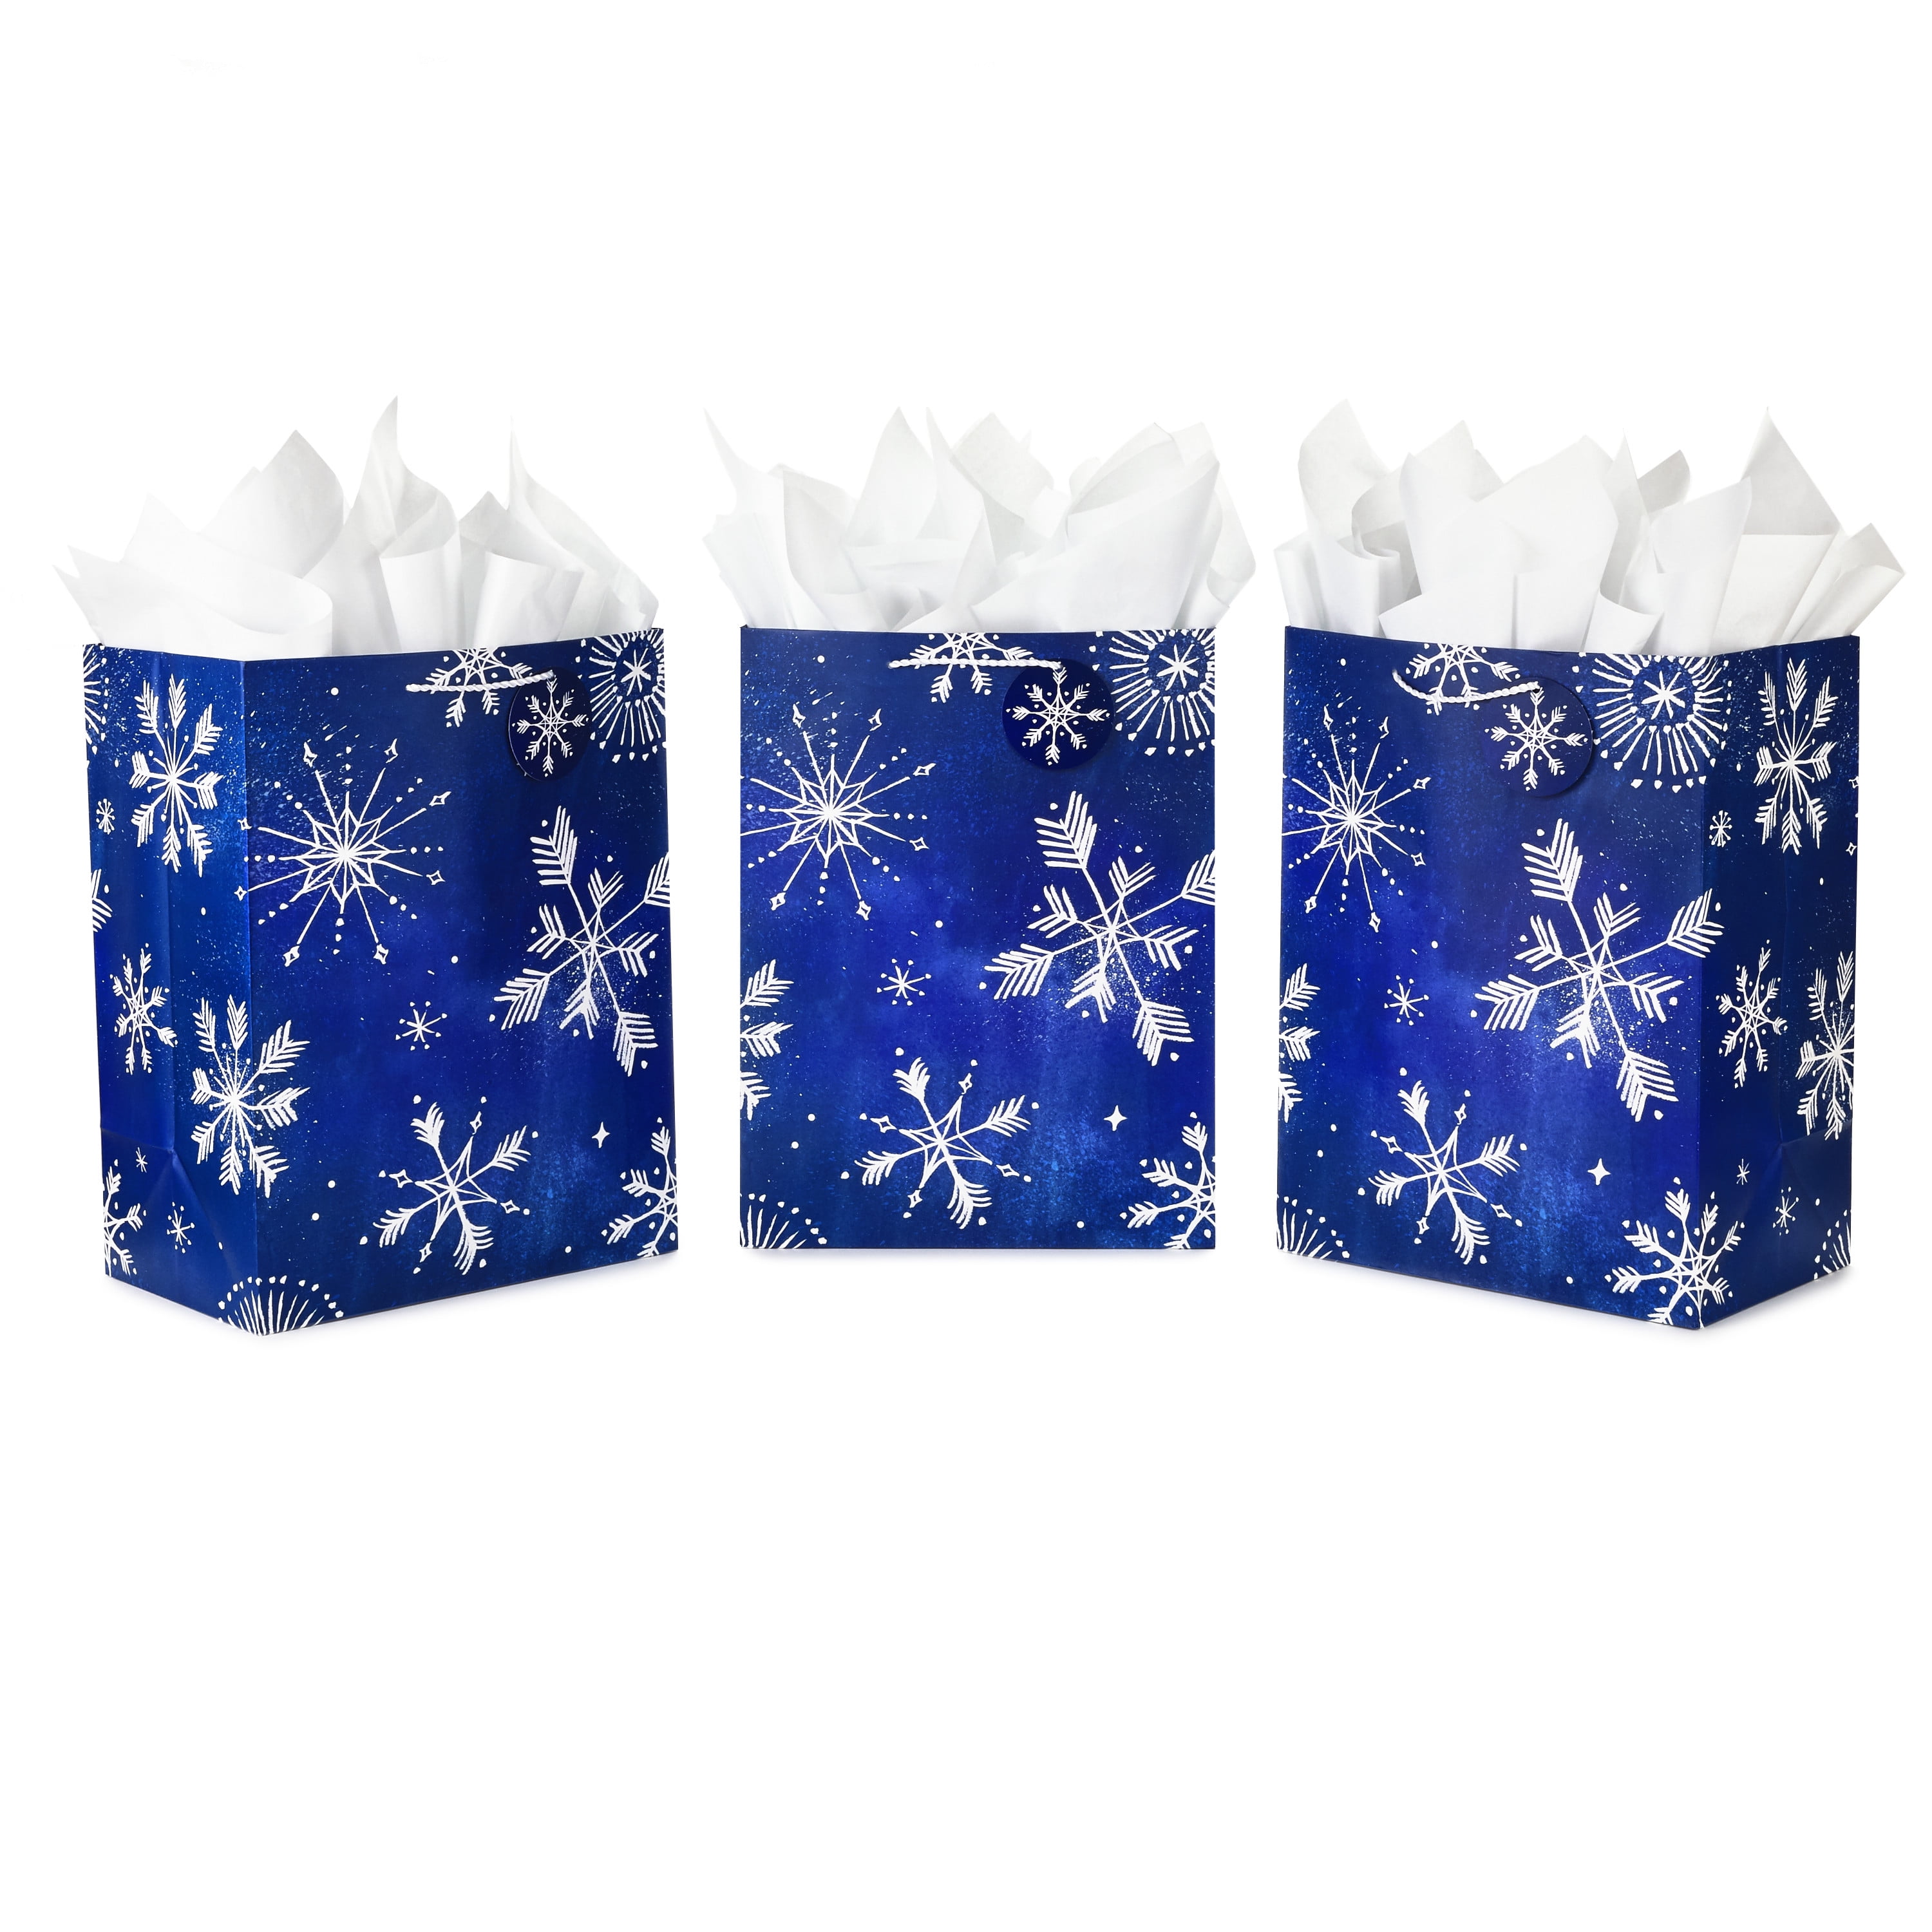 Extra Large Gift Bags with Tissue Paper (3 Gift Bags Starry Snowflakes on  Navy Blue) for Christmas, Hanukkah, Weddings, Birthd - AliExpress